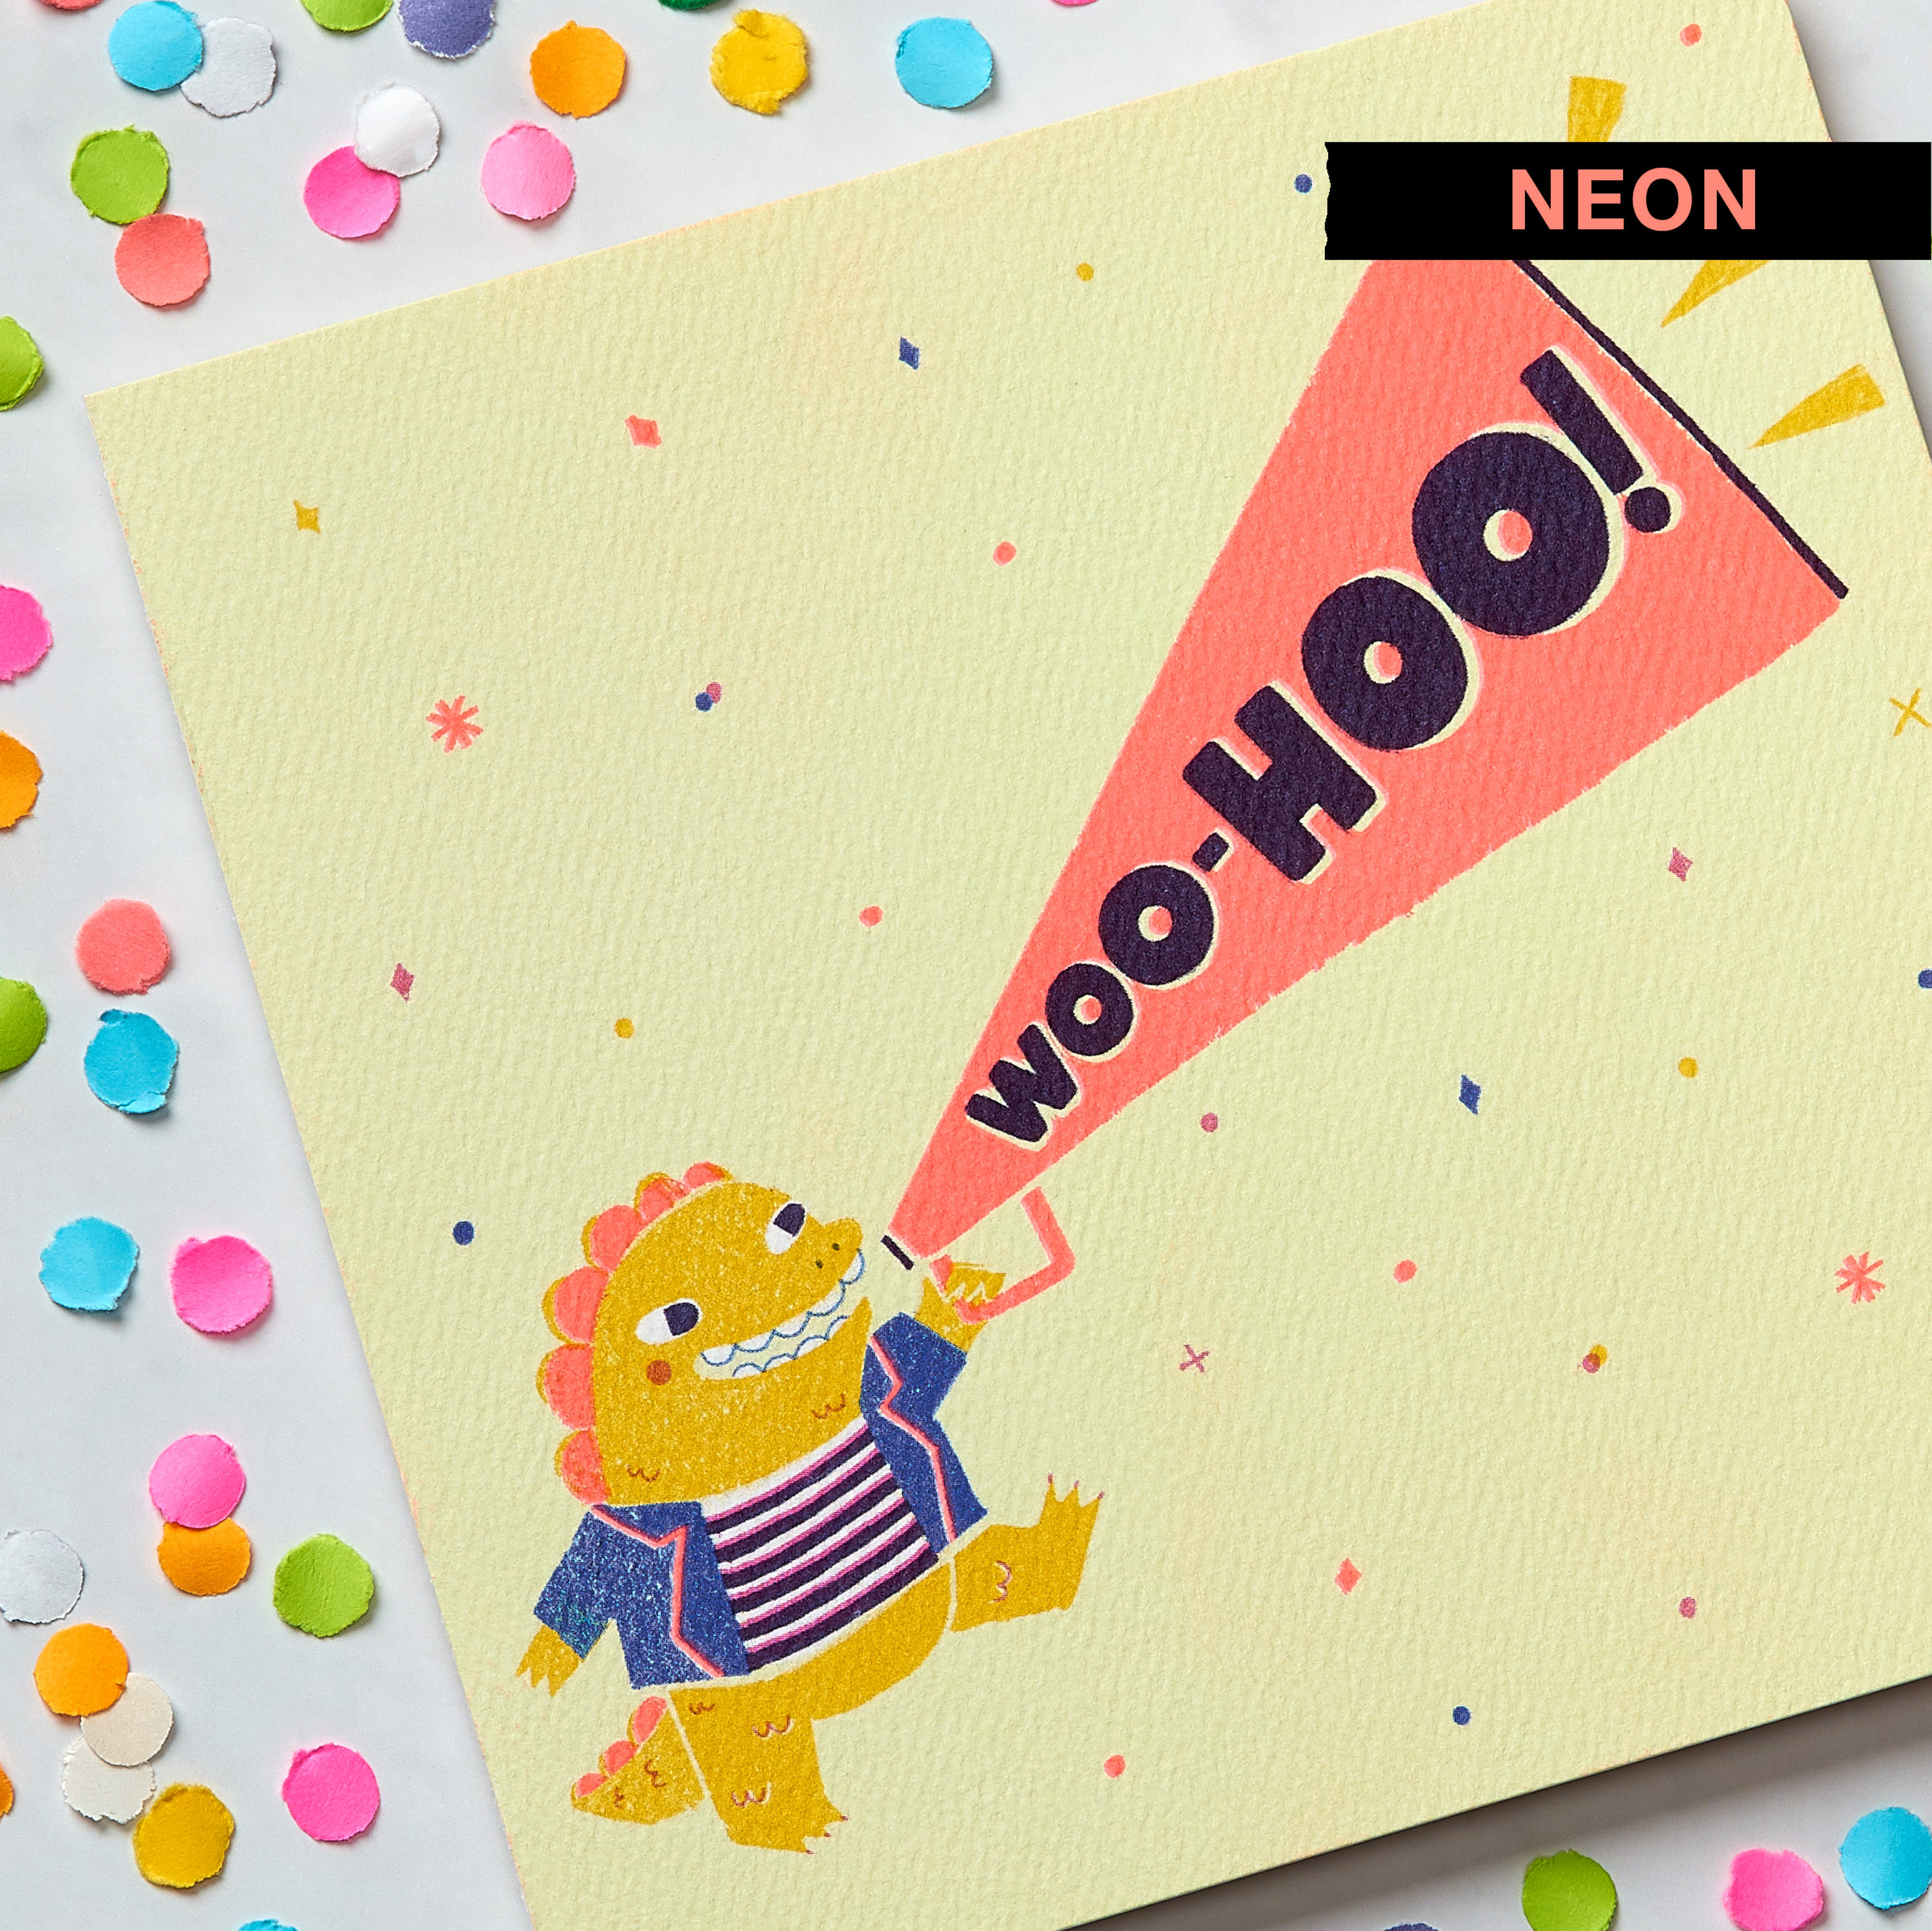 Woo-Hoo Greeting Card for Kids - Birthday, Congratulations, Thinking of You, Friendship, Encouragement image